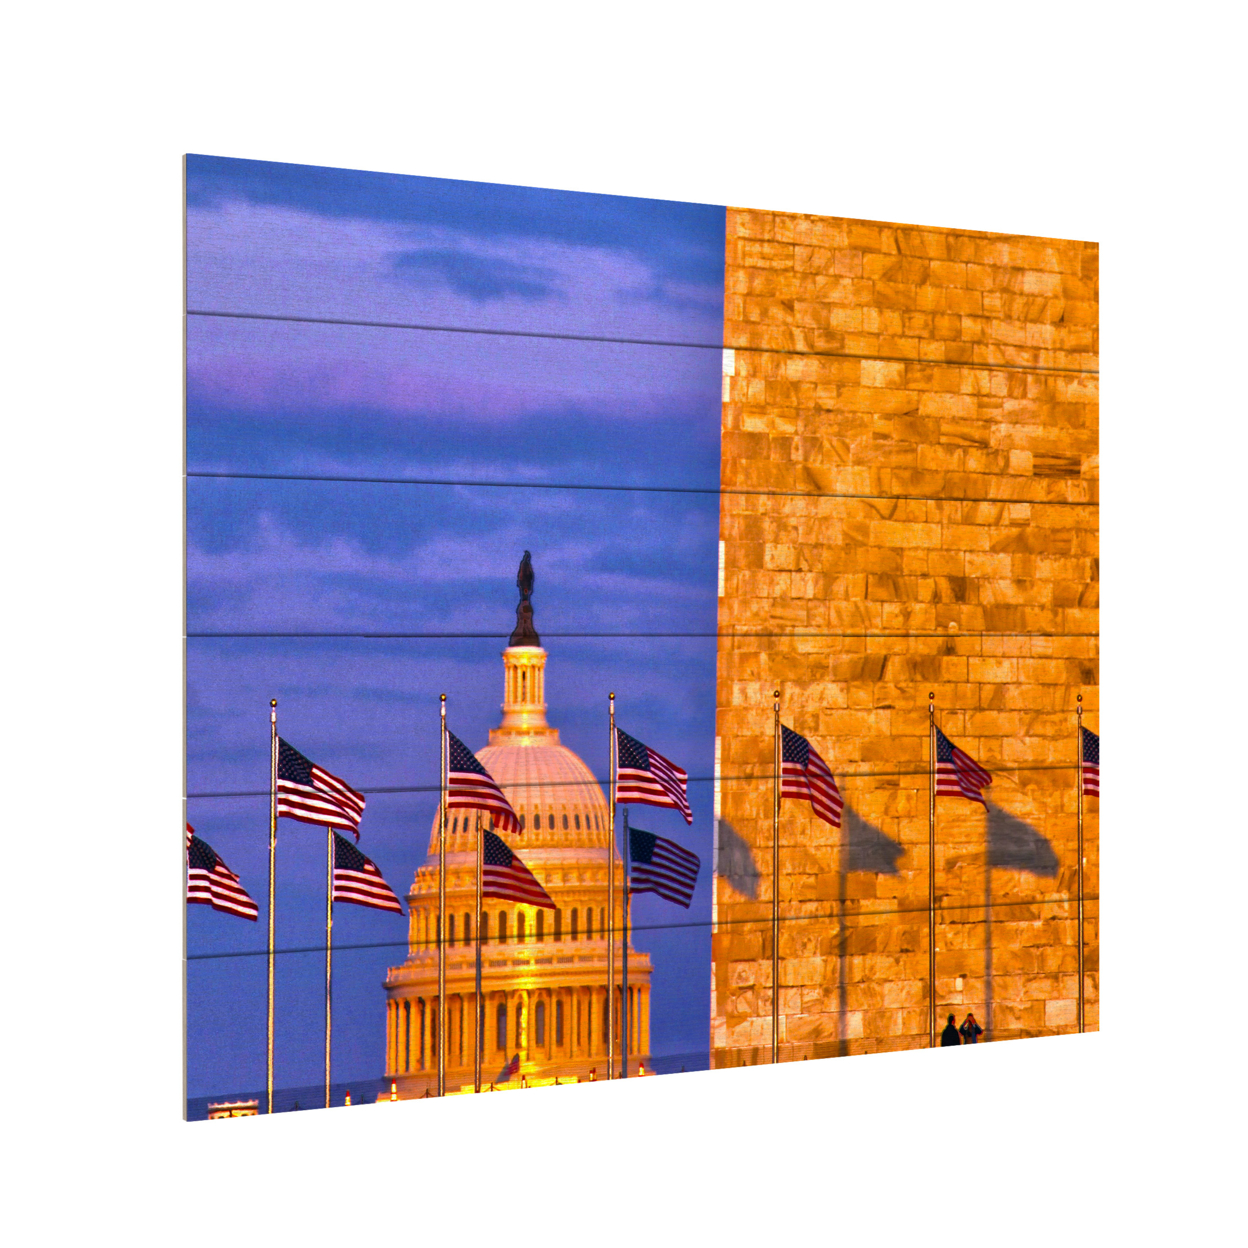 Wooden Slat Art 18 X 22 Inches Titled America Ready To Hang Home Decor Picture